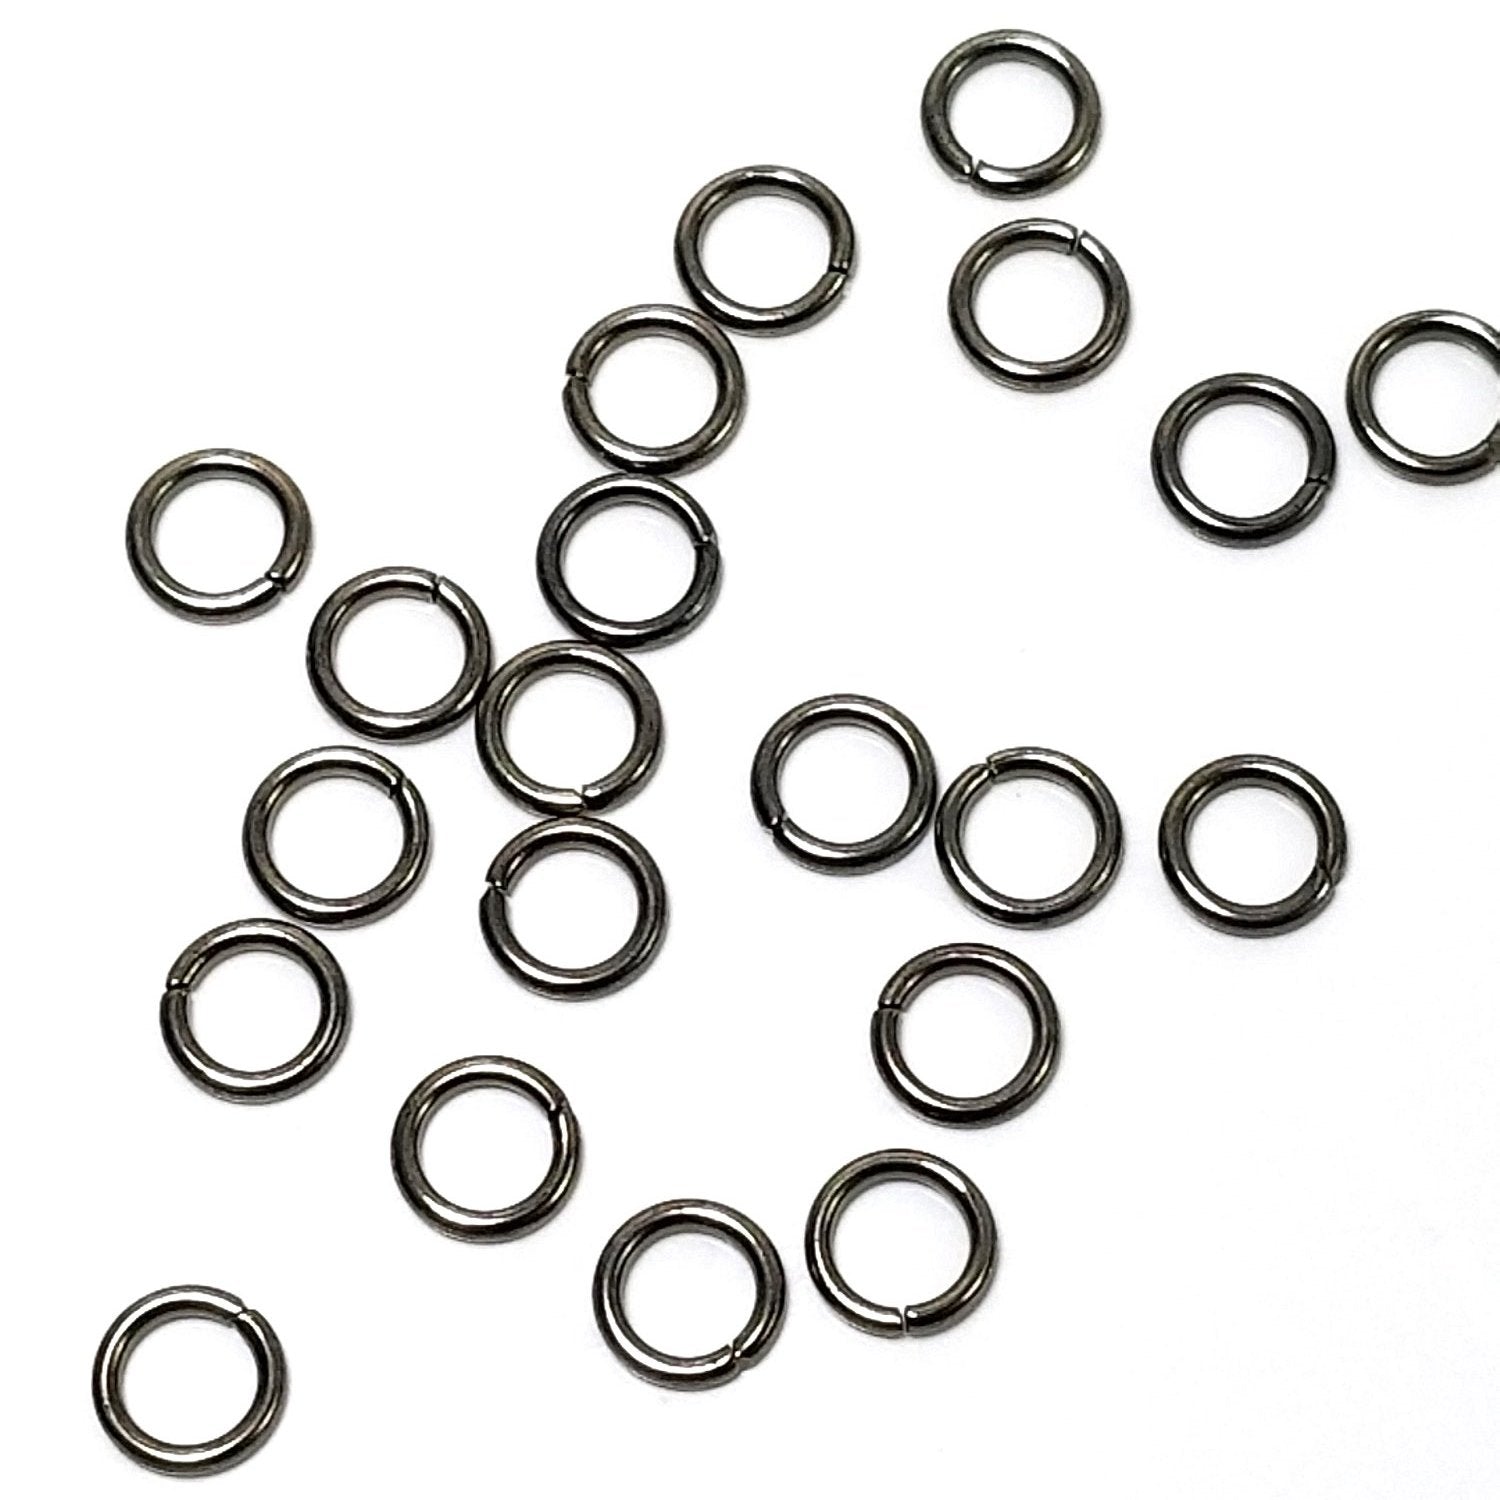 jump rings, black, 6mm, findings, 18ga, 05827, matte black, jewelry making,  jewelry supplies, B'sue Boutiques